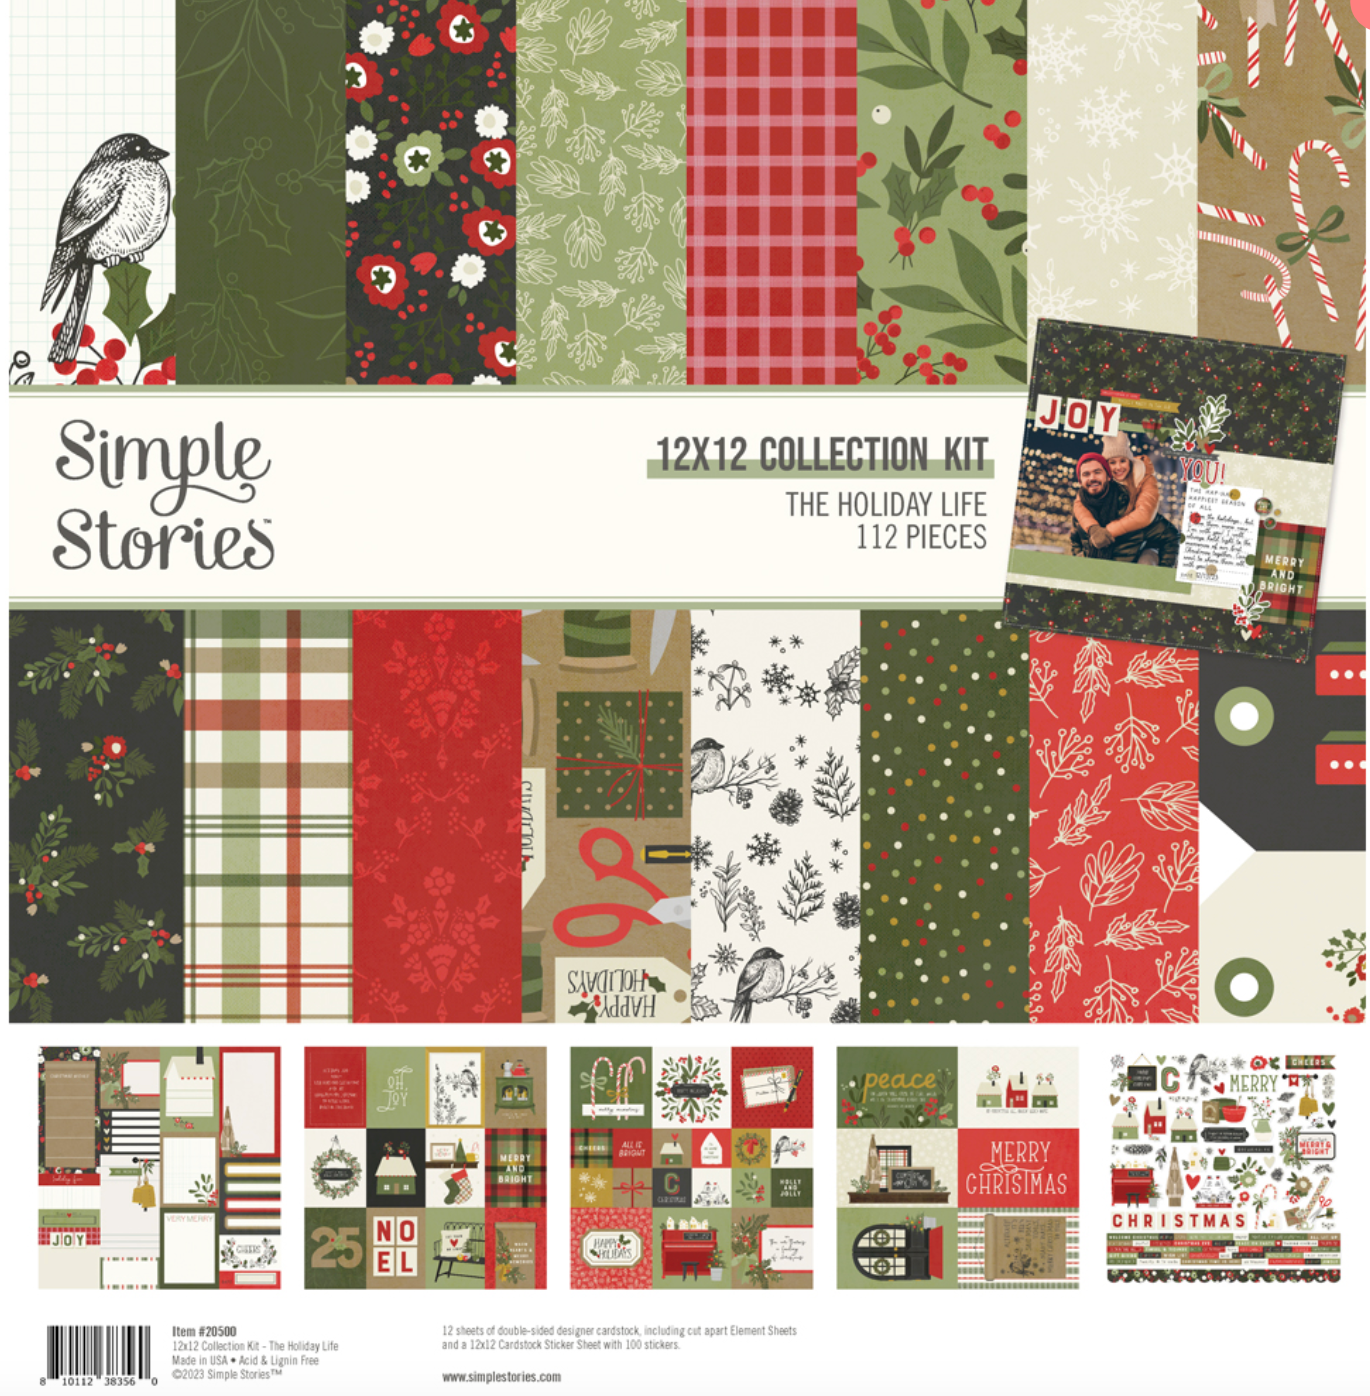 Simple Stories - 12x12 Collection Kit - The Holiday Life - 112 pieces